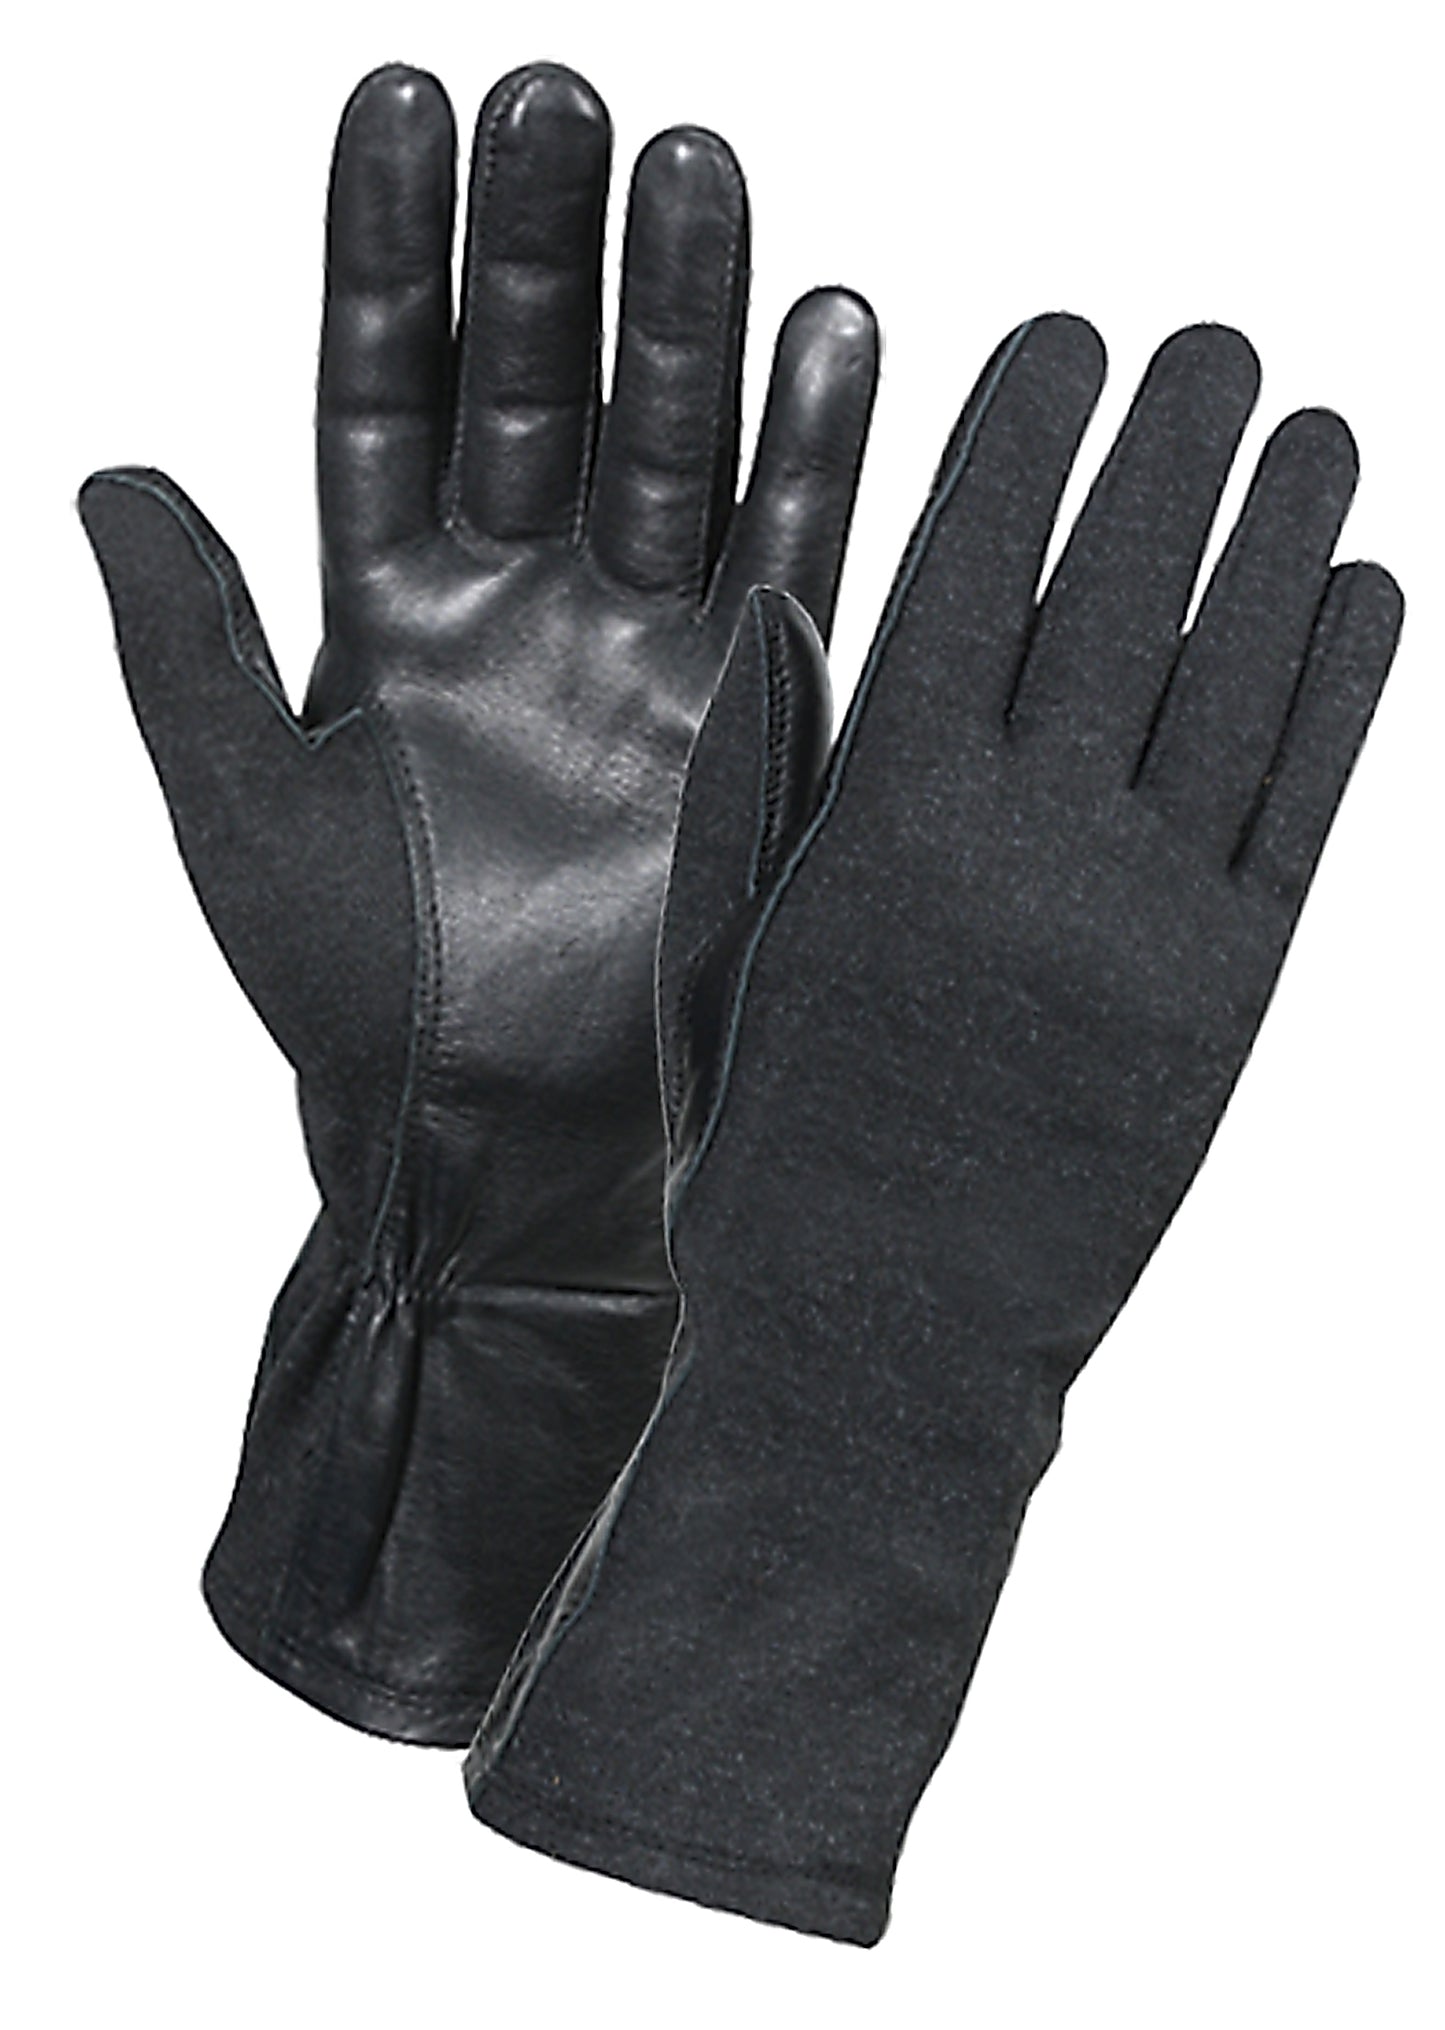 Rothco G.I. Type Flame & Heat Resistant Flight Gloves